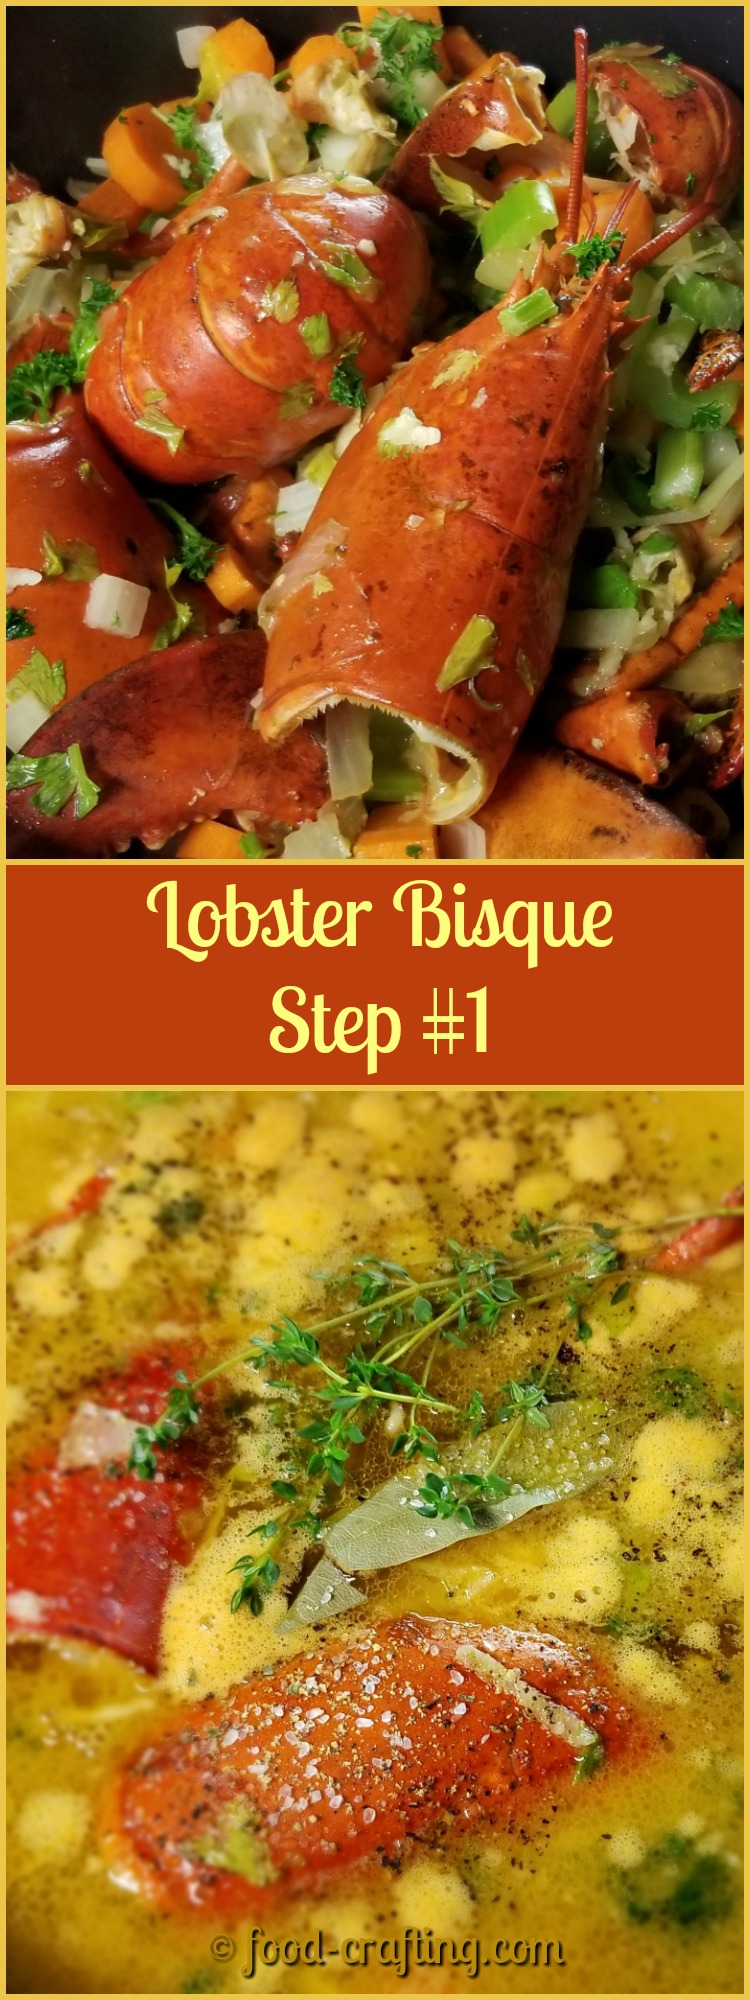 simple lobster bisque recipe - The Pinterest pin was definitely a teaser for what is a scrumptious and simple lobster bisque recipe. I started early this morning breaking apart 2 lobsters in to tail, claws and legs.   